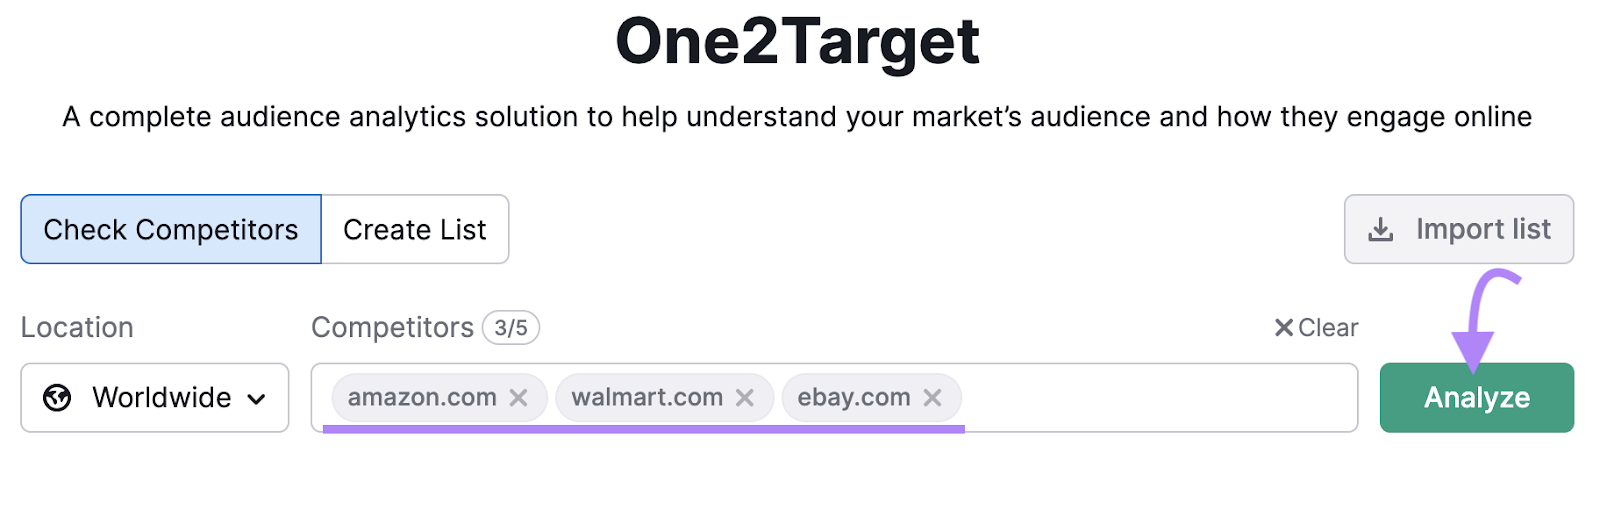 One2Target search bar